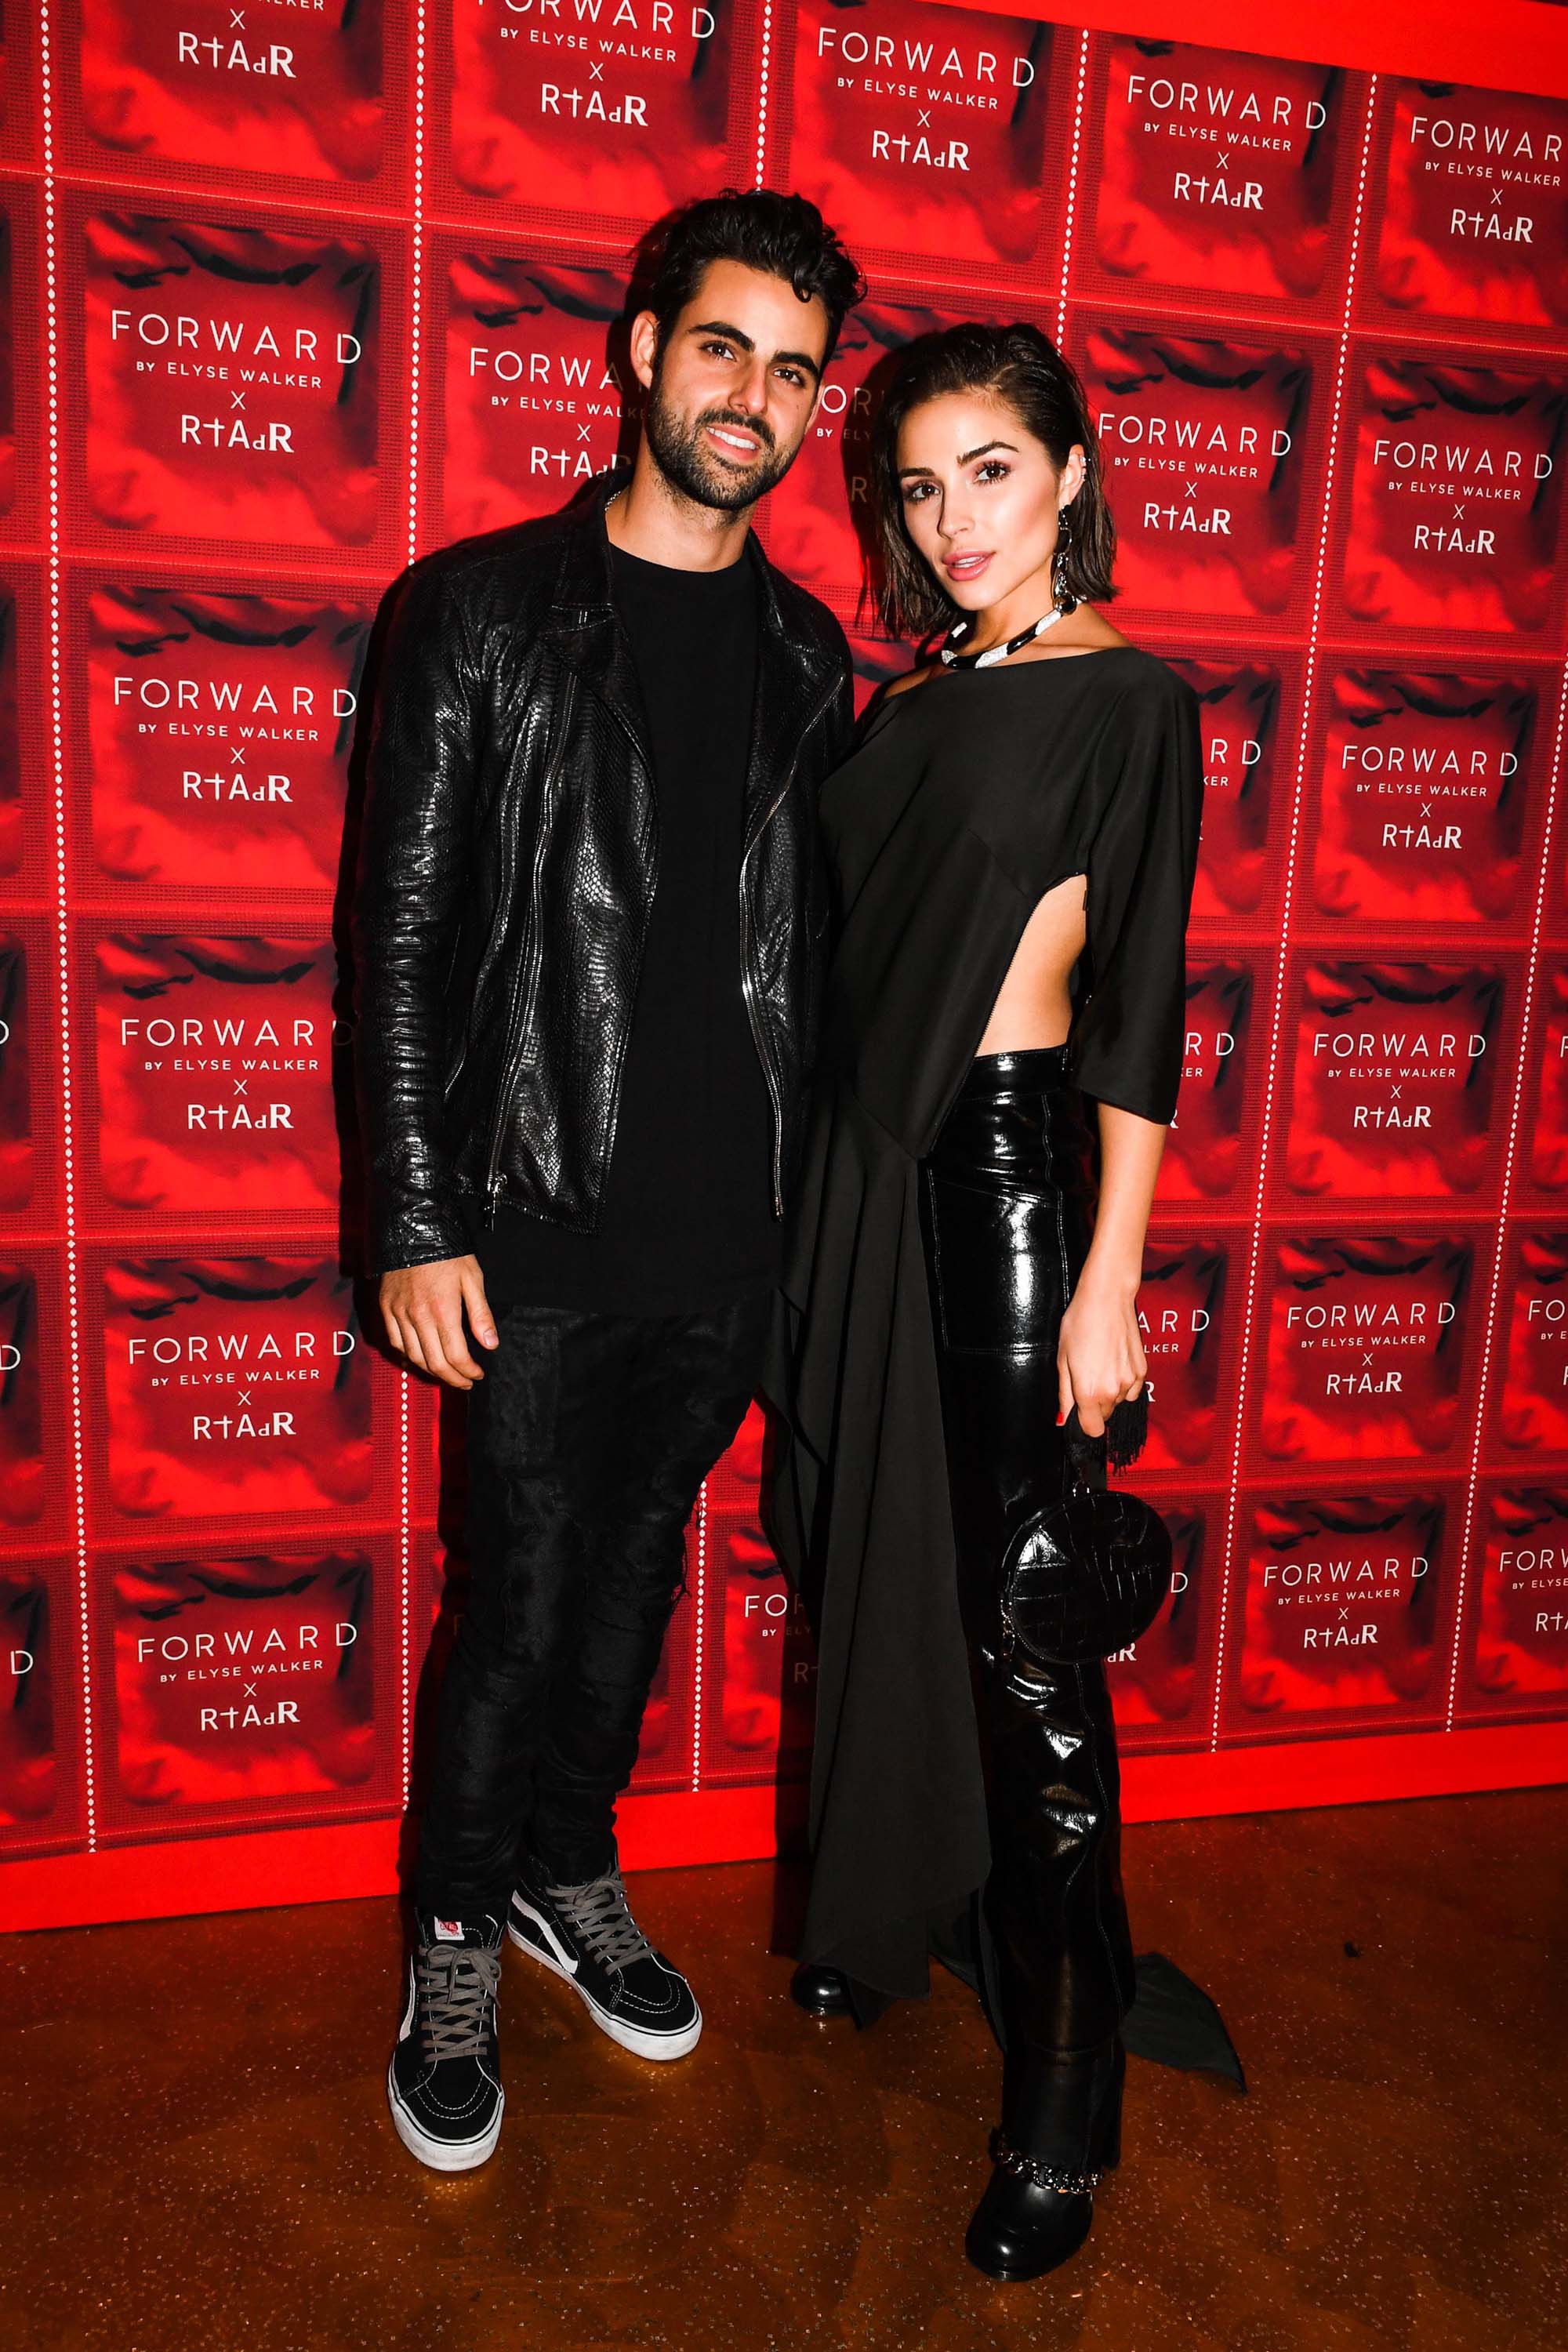 Olivia Culpo attends Forward by Elyse Walker party